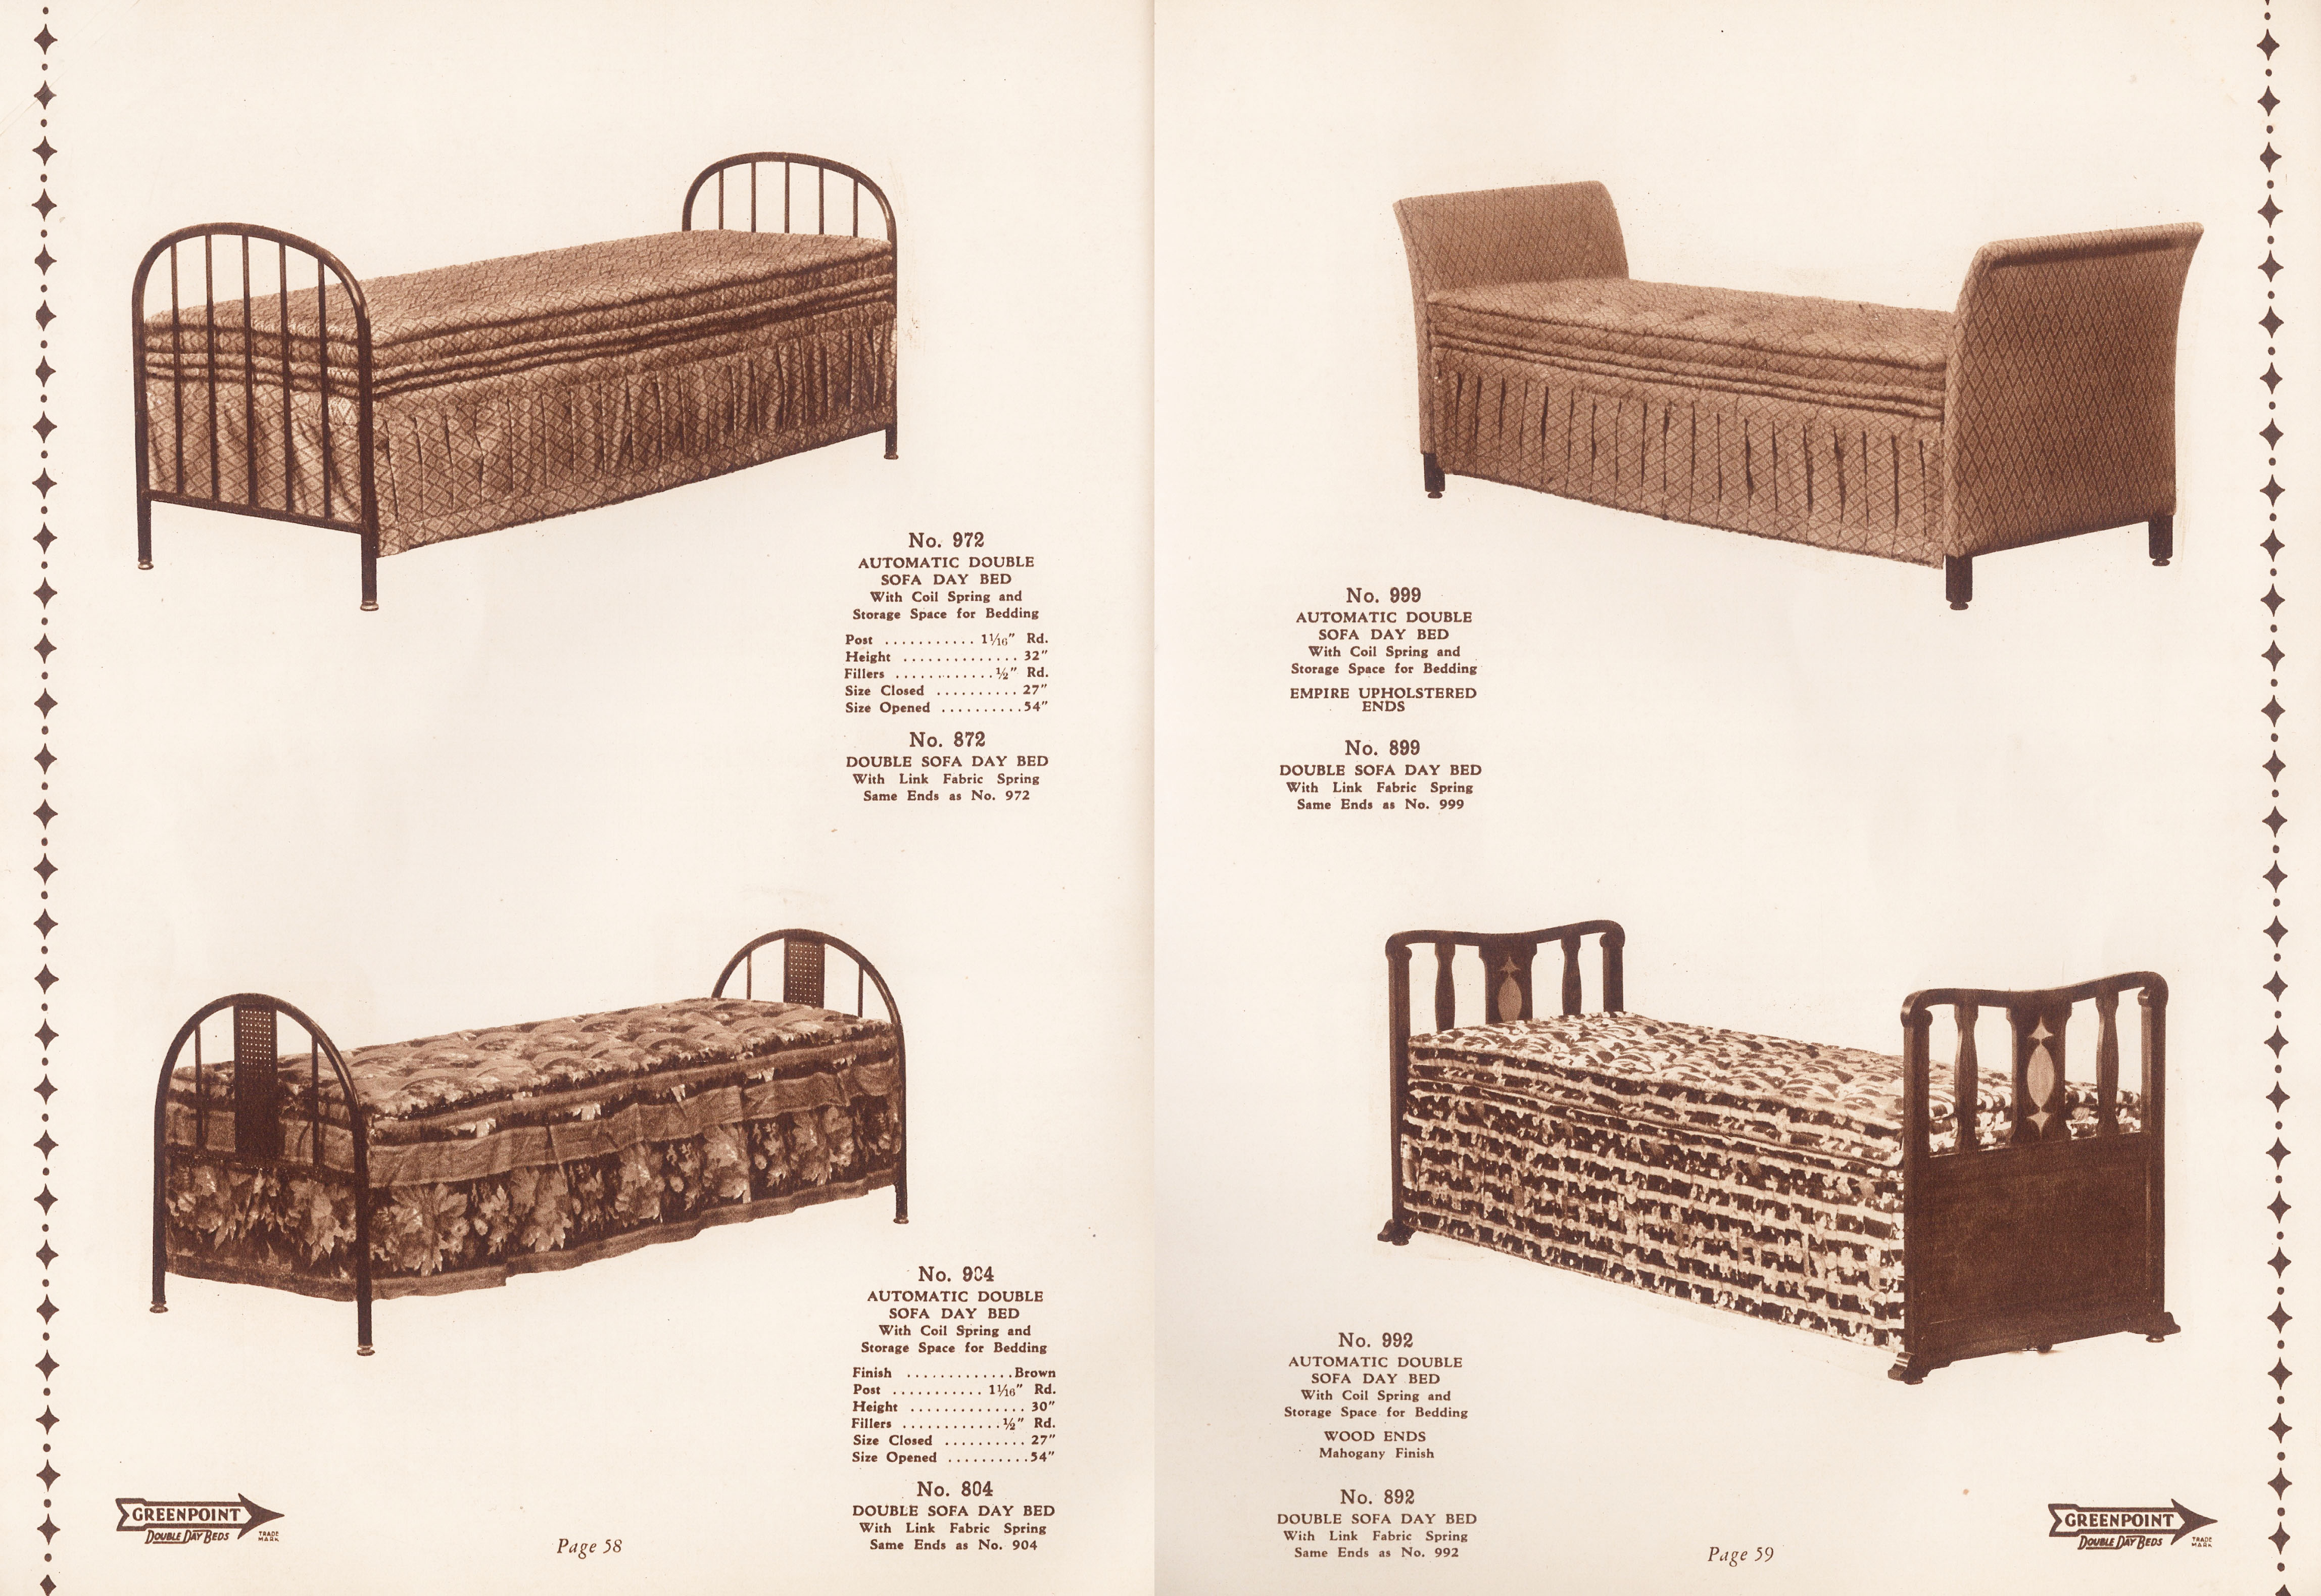 Greenpoint Bed Company Bed Catalog Page 2